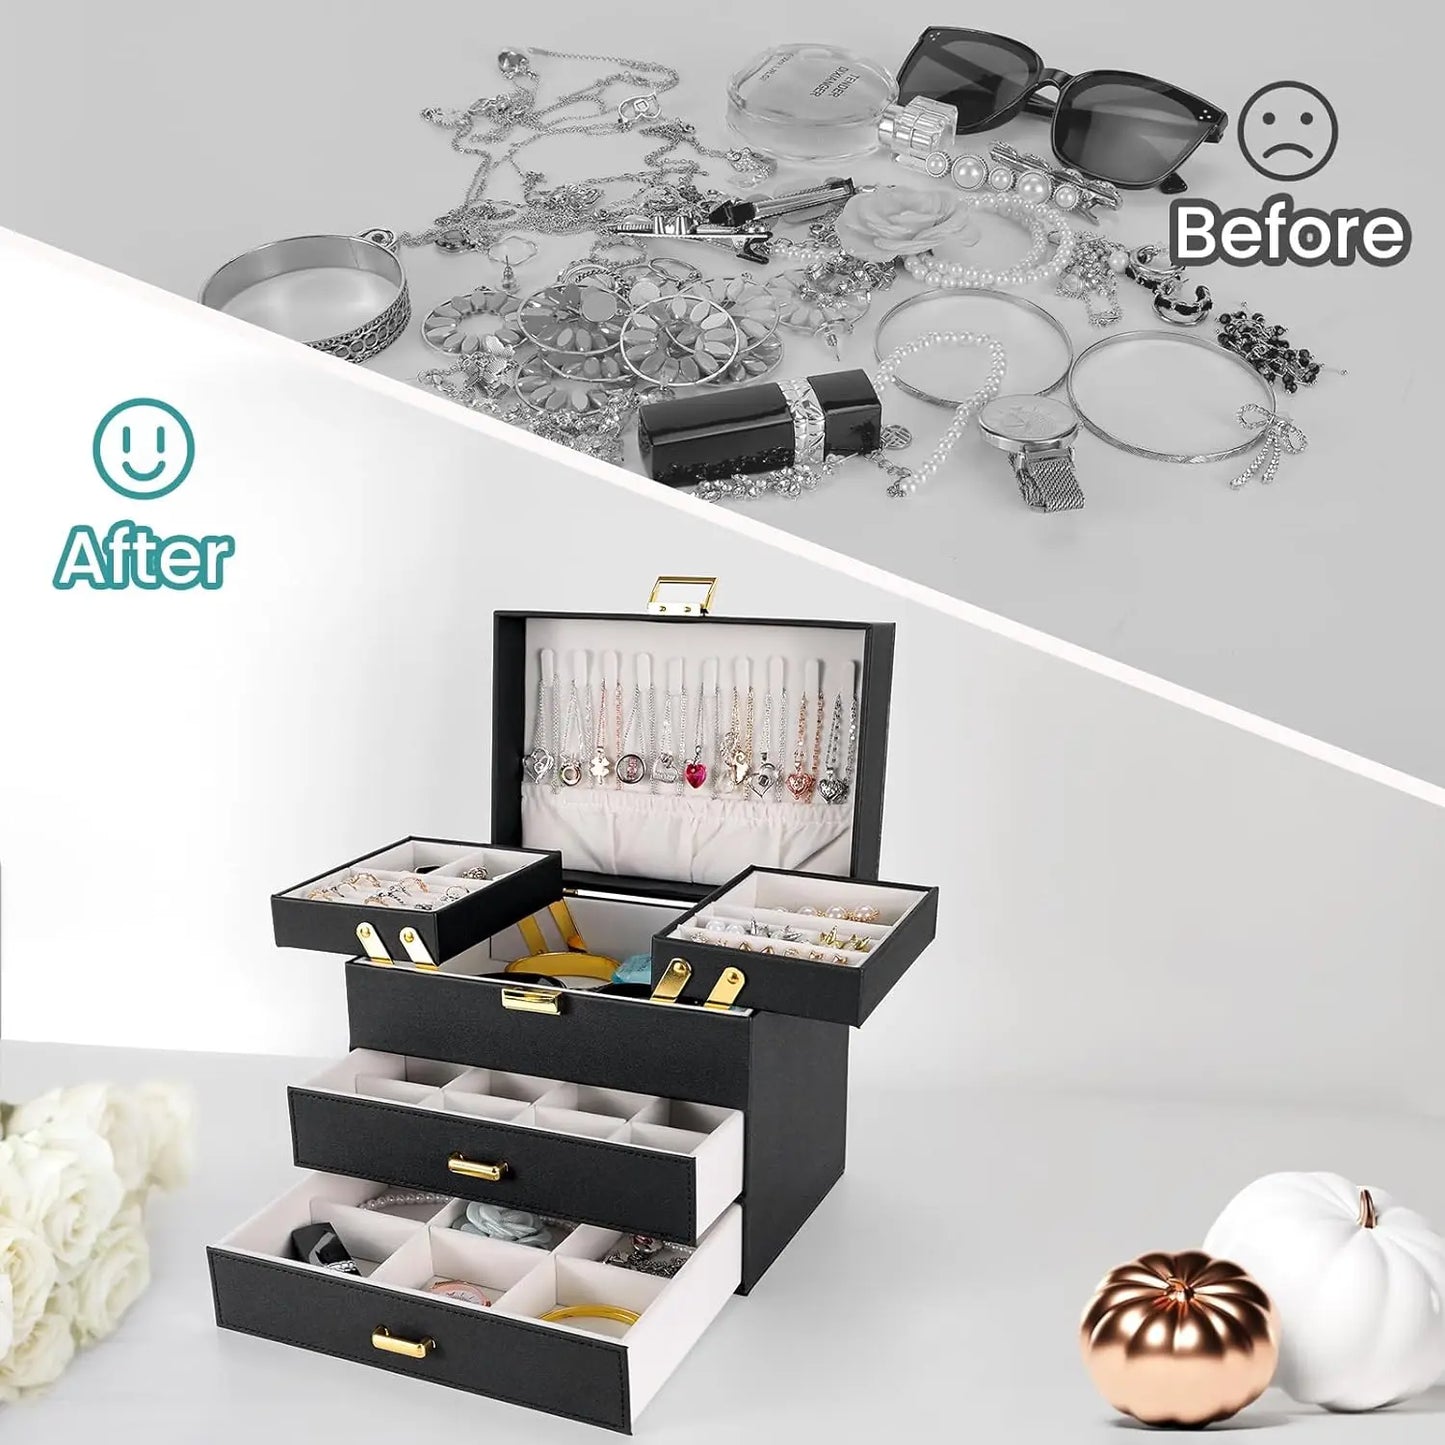 Jewelry Boxes for Women Girls, Jewelry Holder Organizer Box, 4 Layers Large Jewelry Storage Organizer for Earring